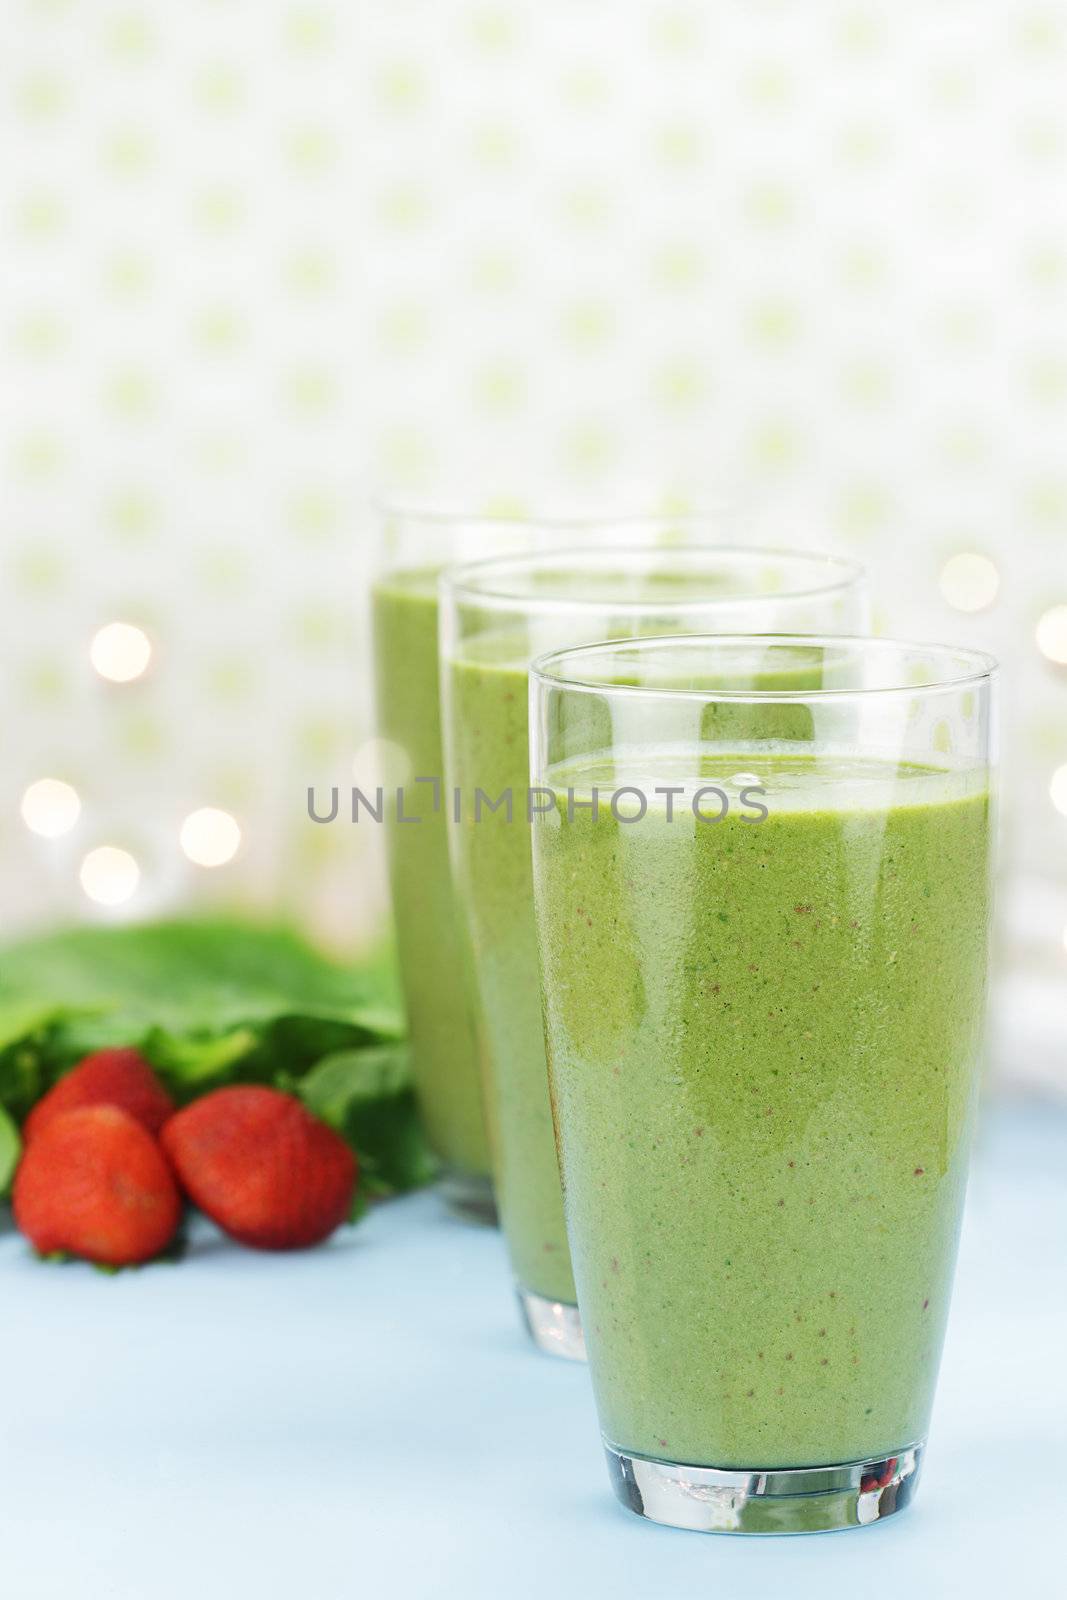 Delicious freshly made Spinach and Strawberry smoothies made with cold milk, yogurt, spinach and strawberries. Extreme shallow depth of field with selective focus on glass in foreground.
